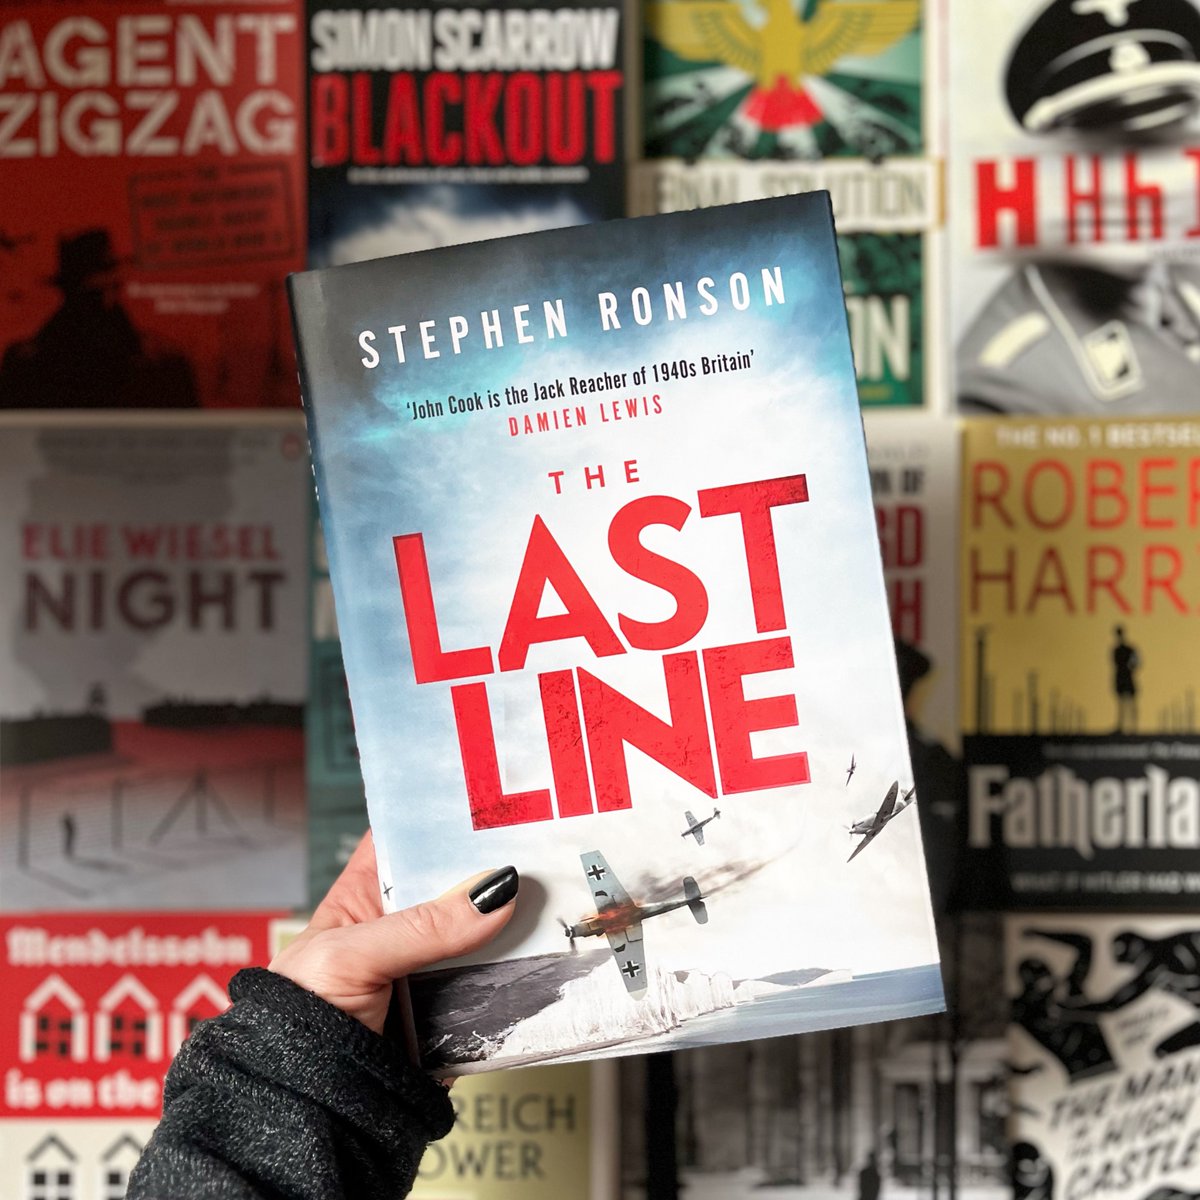 #HappyPublicationDay to @Stephen_Ronson My full review for #TheLastLine is up on Insta!

instagram.com/p/CztqYaAomT2/…